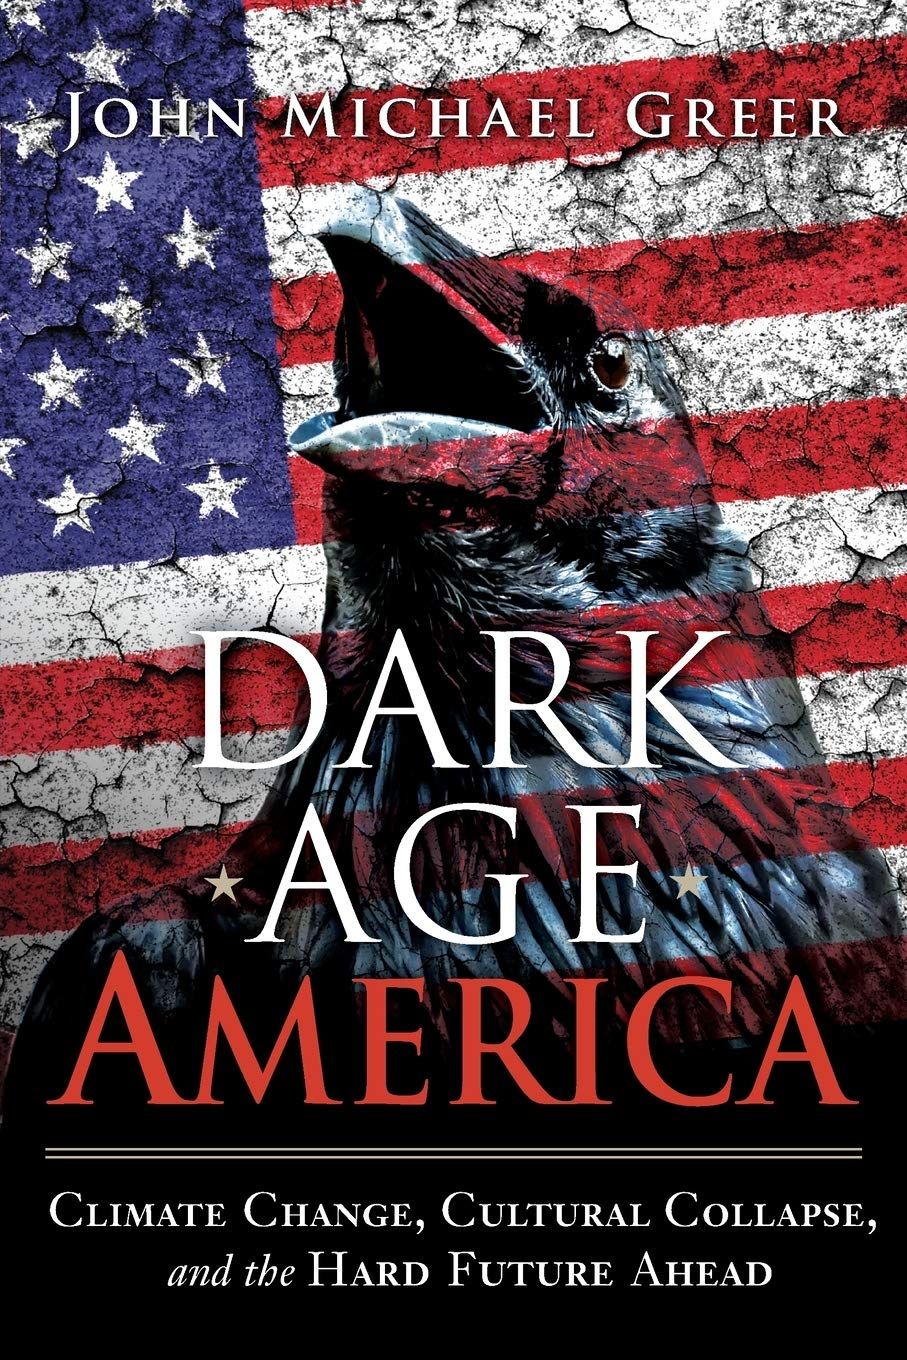 Dark Age America: Climate change, cultural collapse, and the hard future ahead